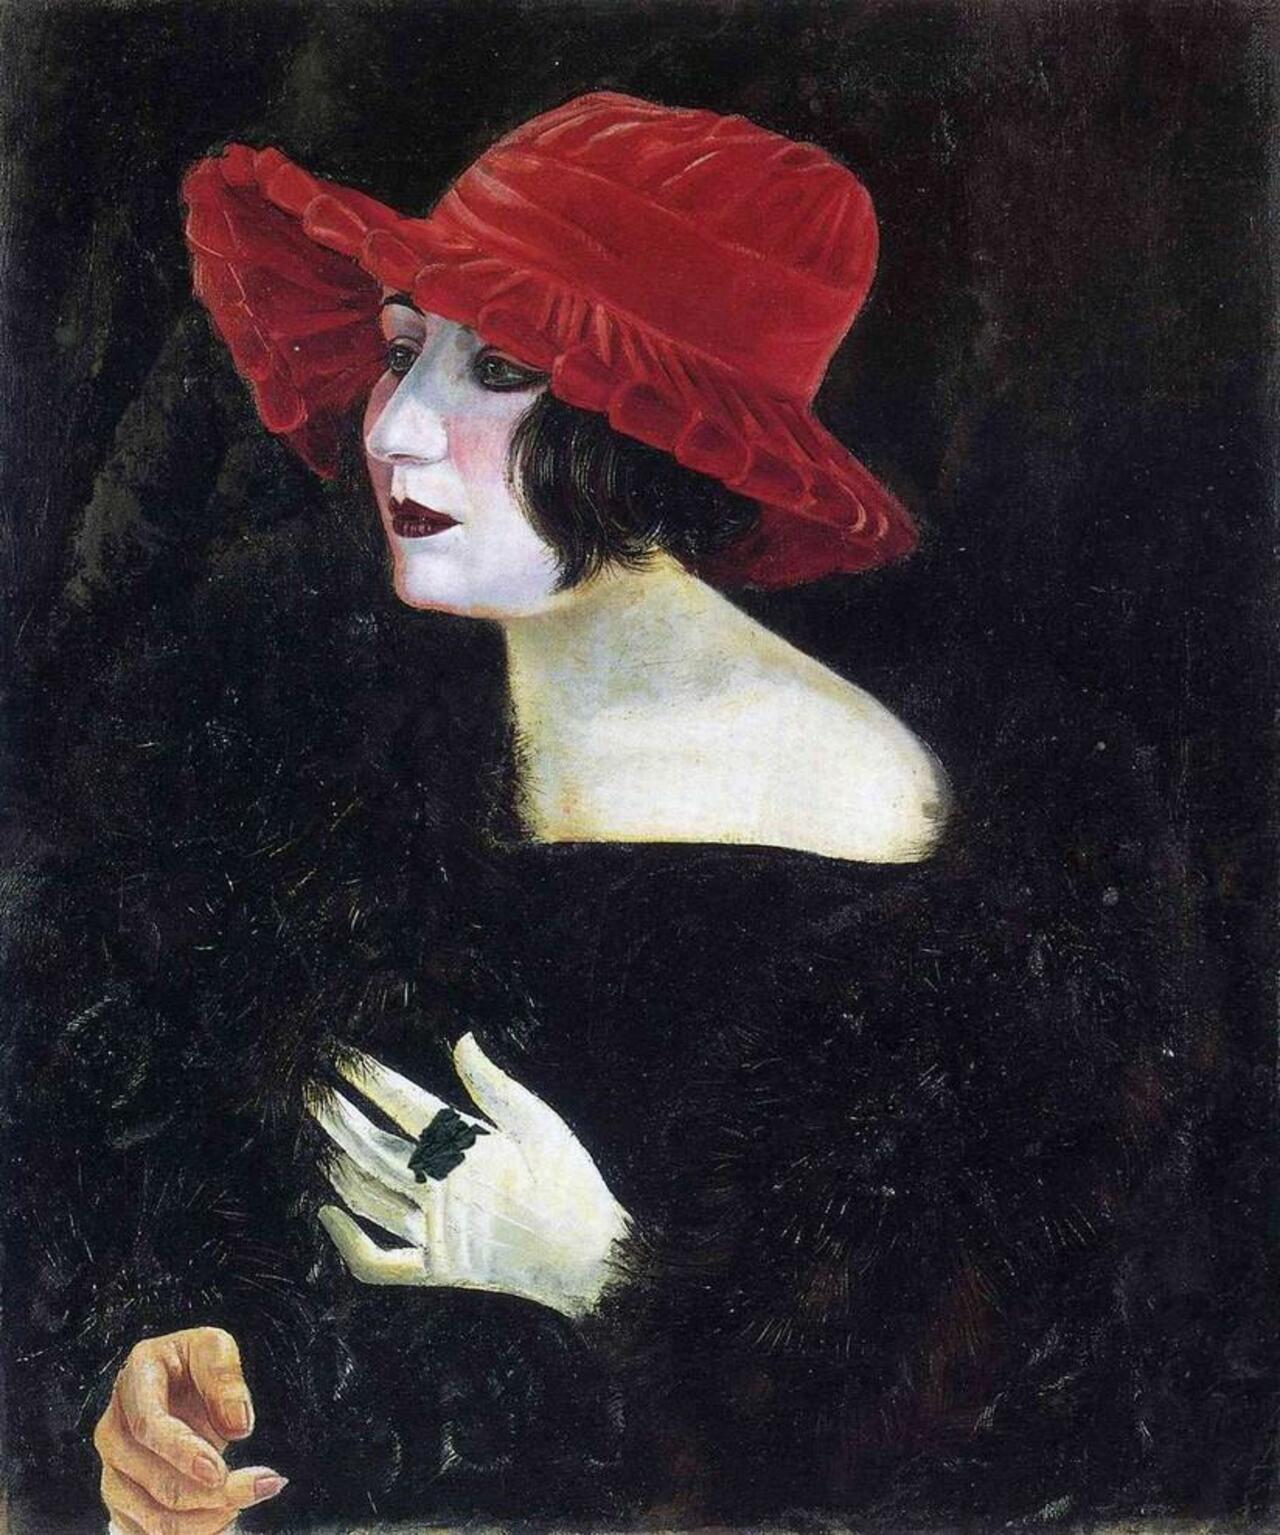 Otto Dix #Art #Paintings #German #Expressionism #Verism #Dada #Cubism http://t.co/vJasFEBiy6